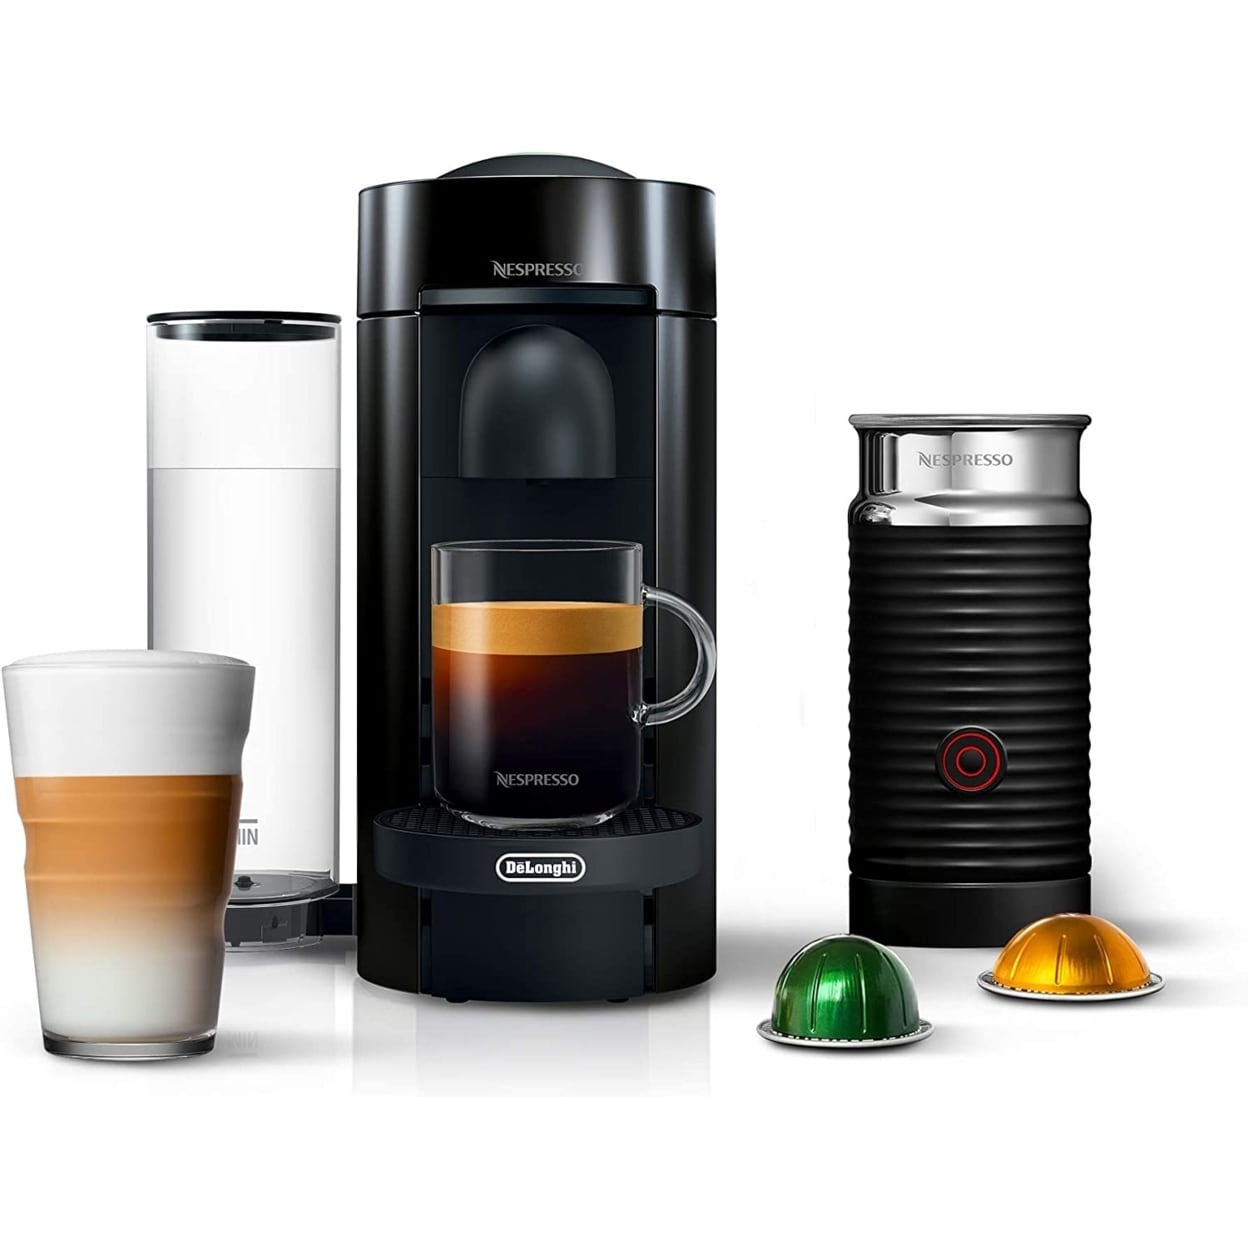 Nespresso: The Art of Crafting the Perfect Cup